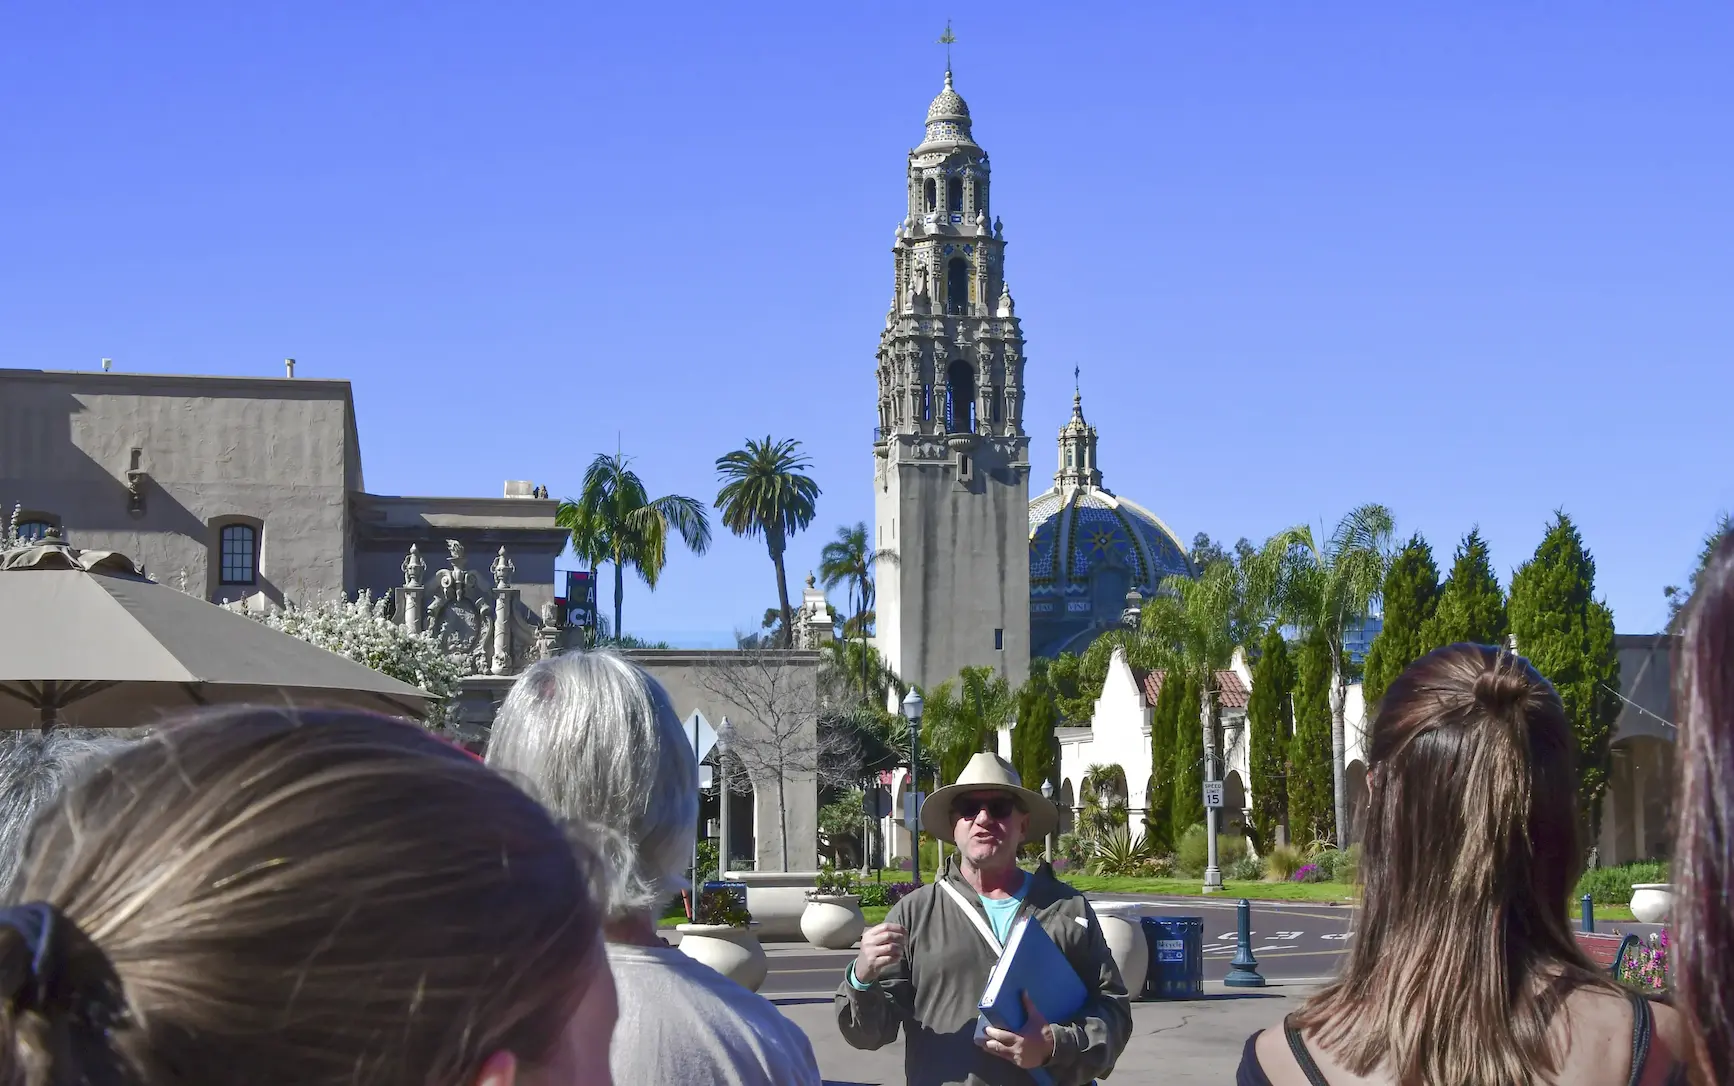 A tour group with the backs of park visitors heads in the foreground and the tour guide's face and California Tower in the background.